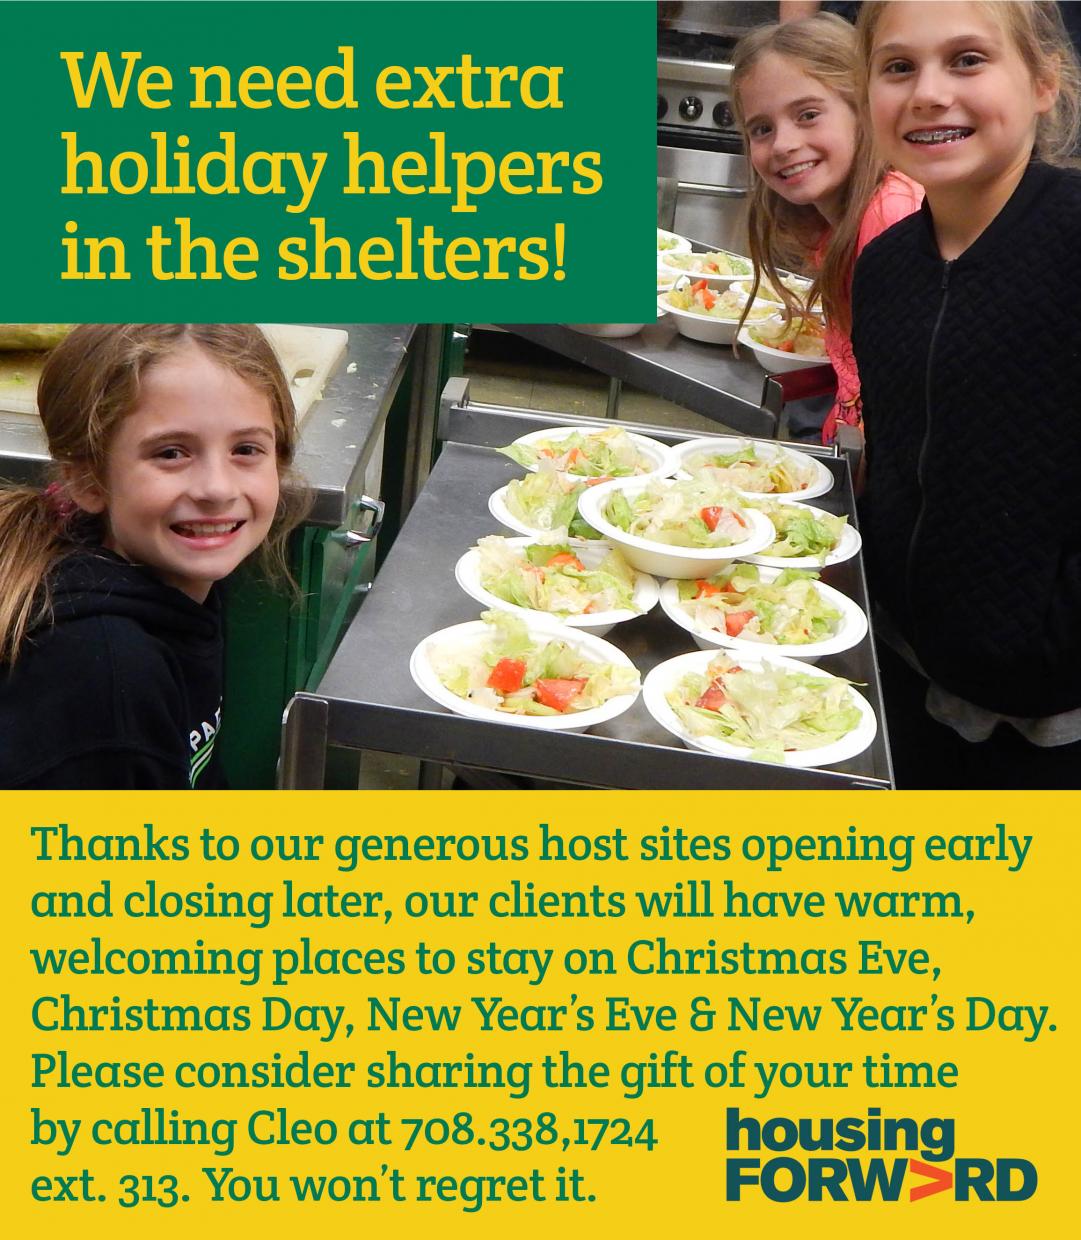 Extra holiday helpers needed.